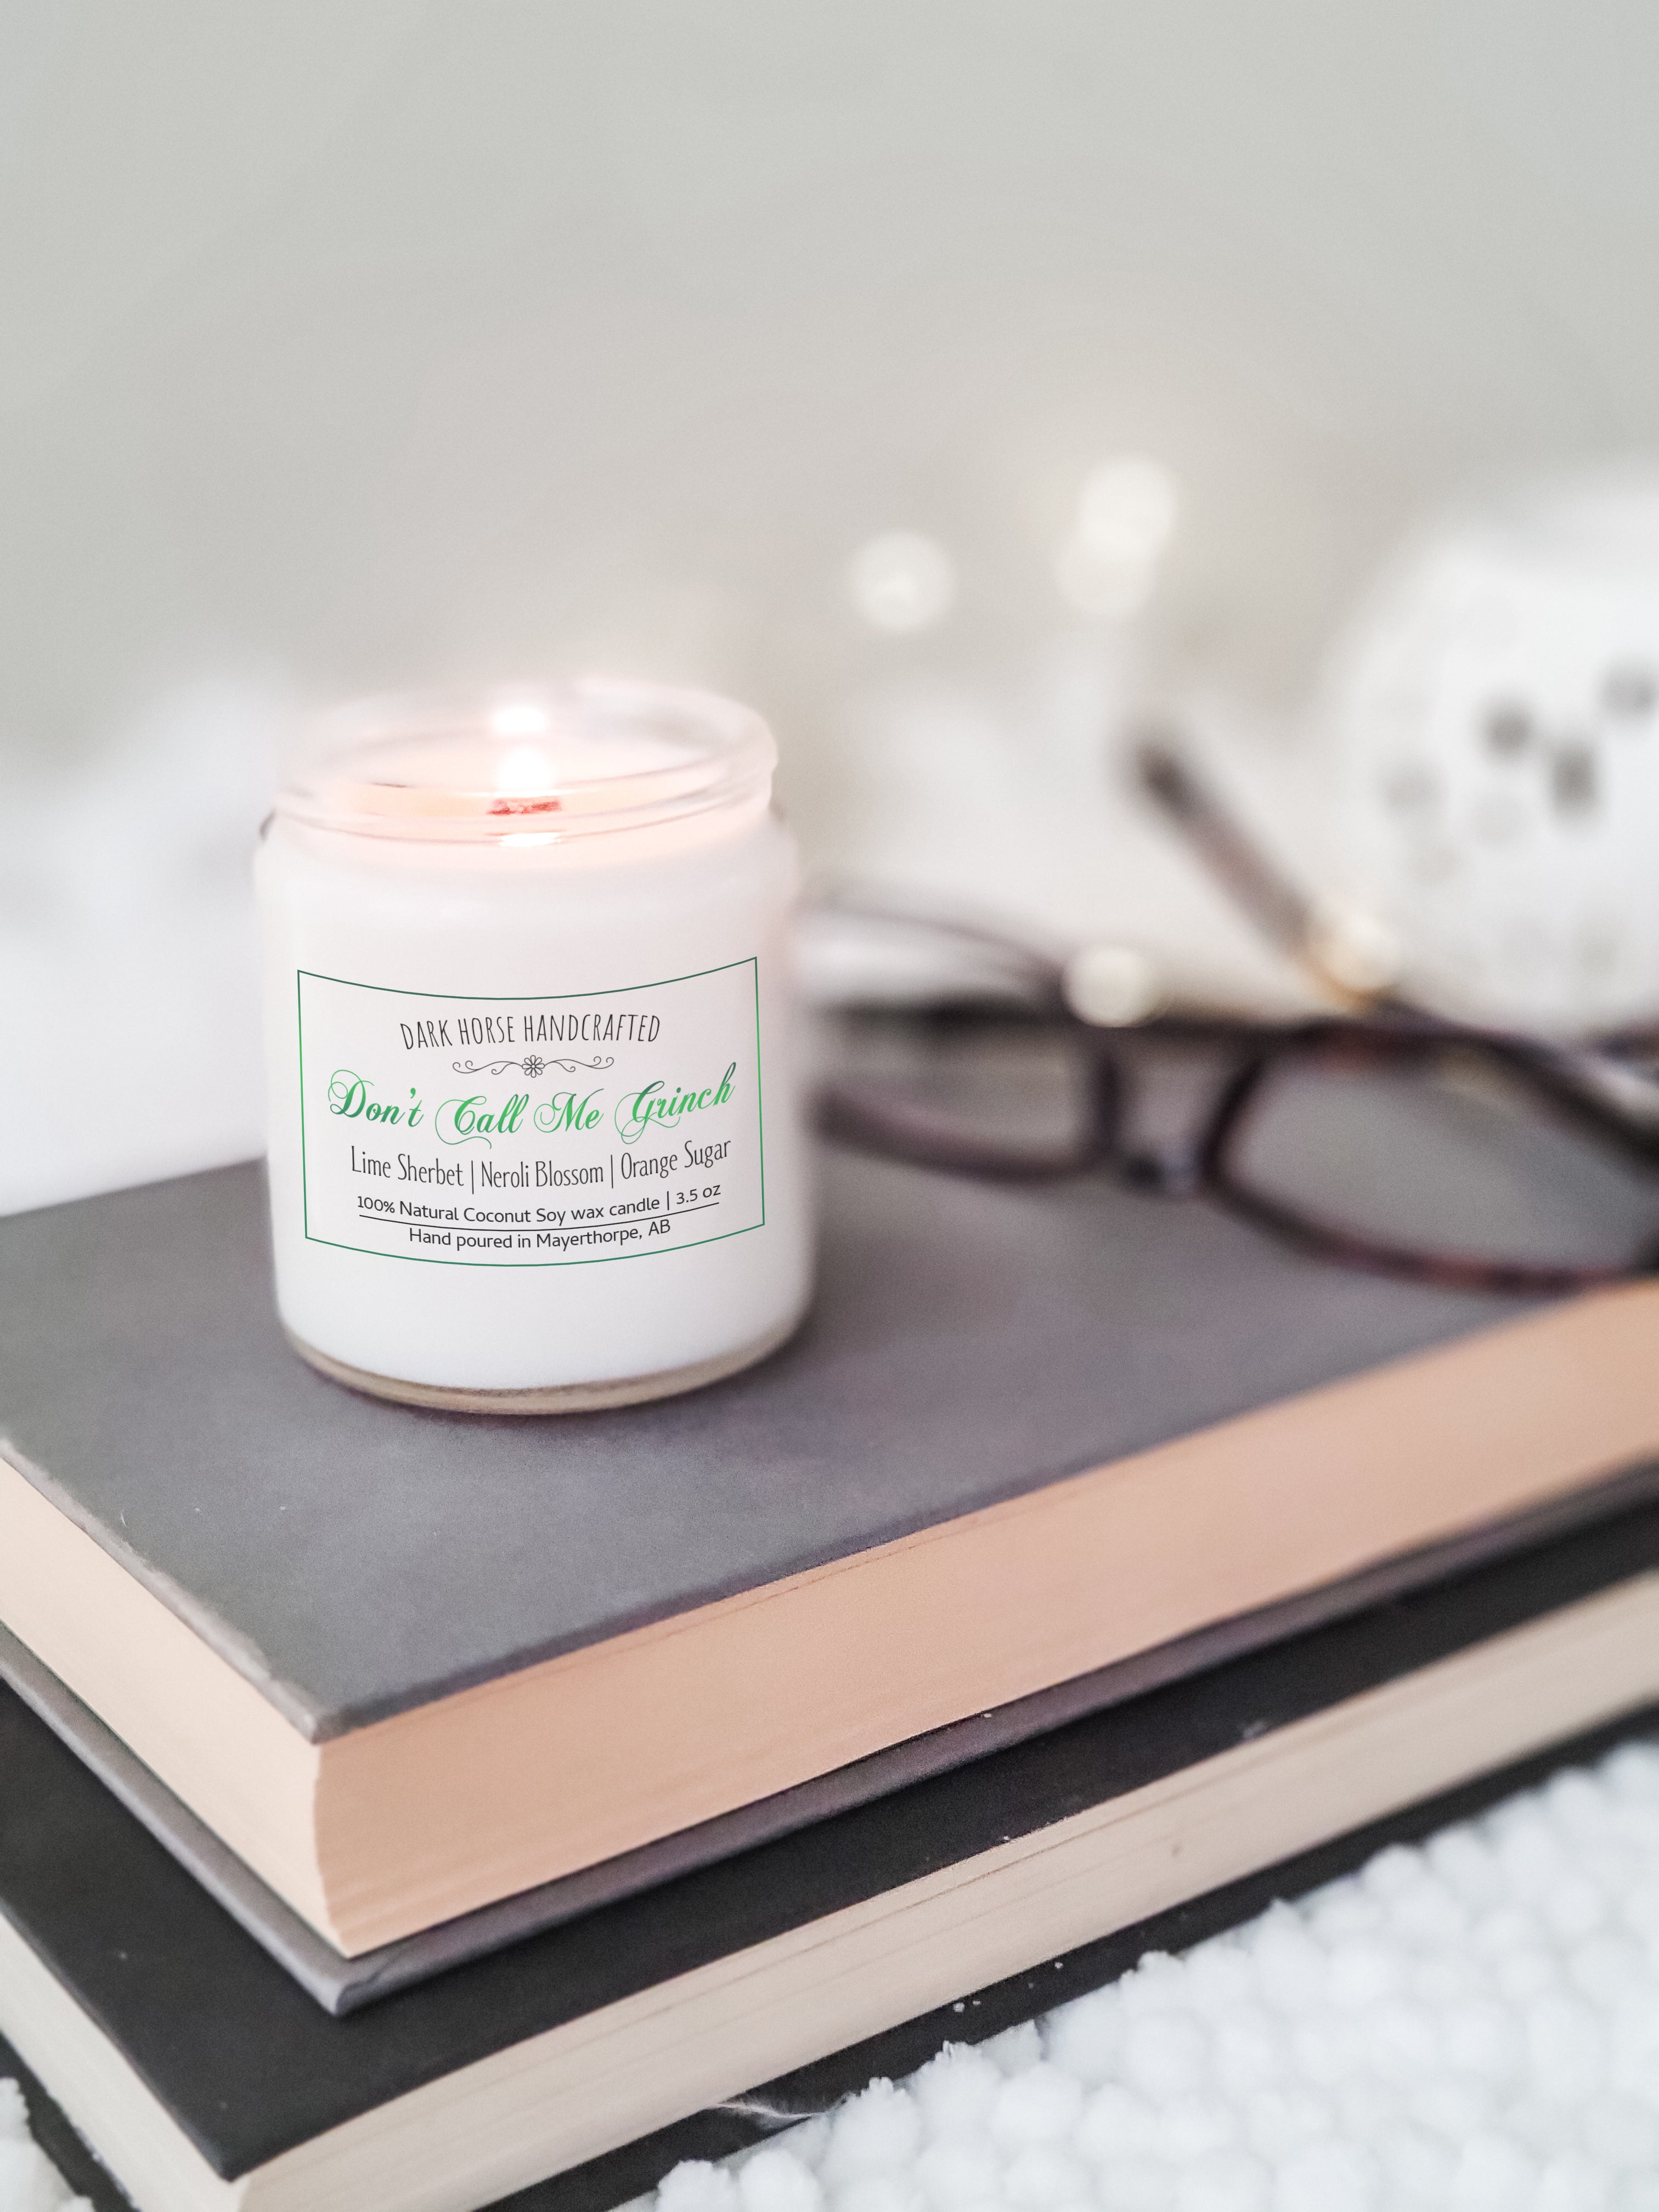 Don't Call Me Grinch - Soy Candle